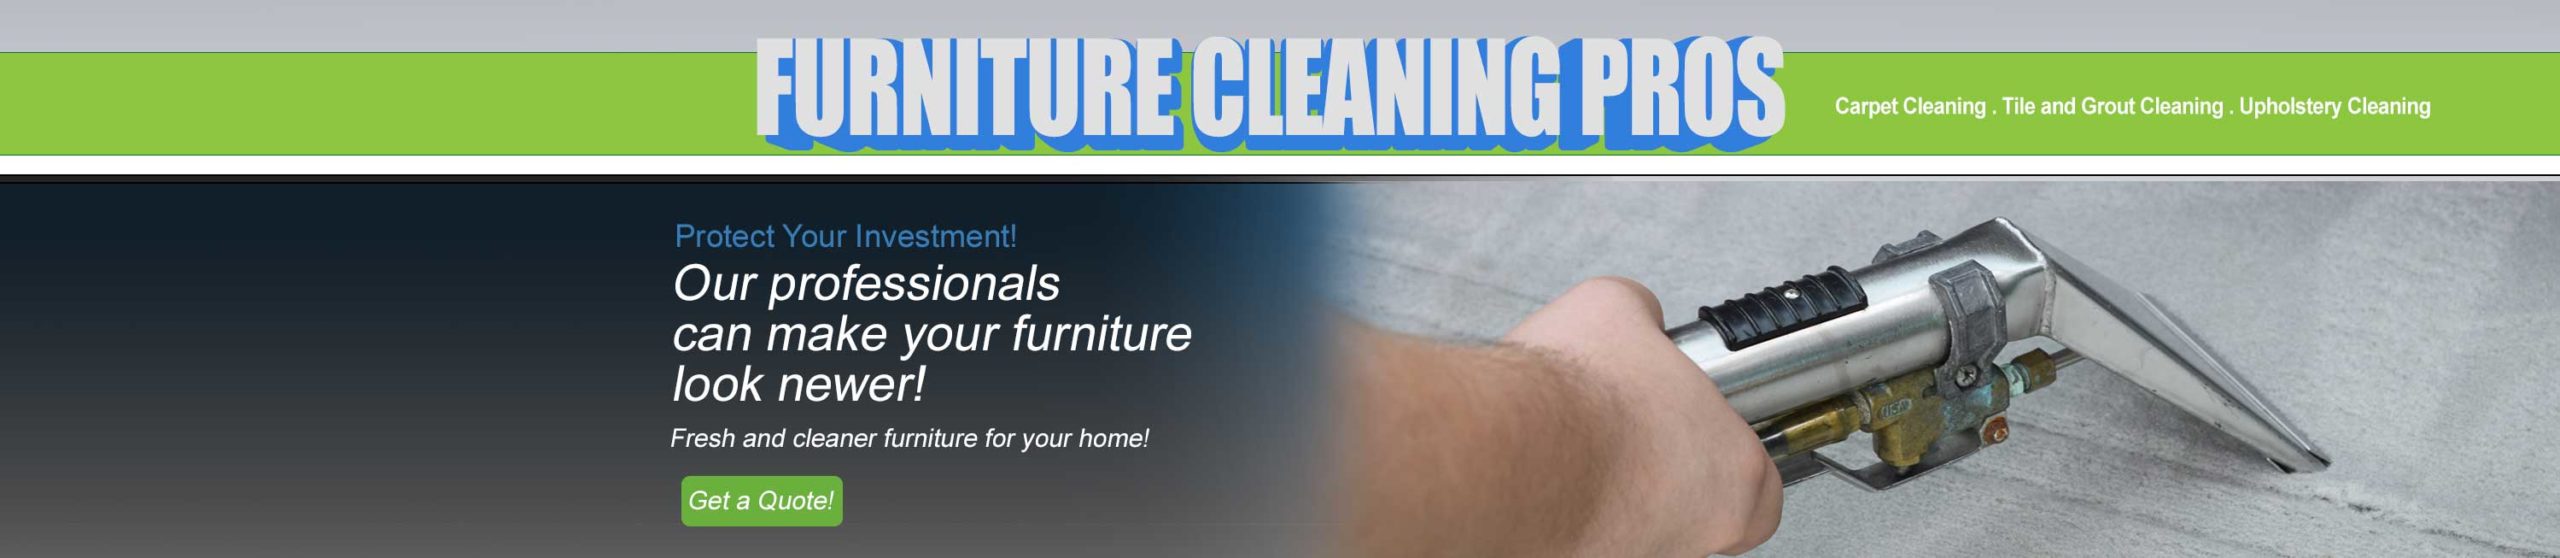 Furniture and upholstery cleaning in Carefree AZ